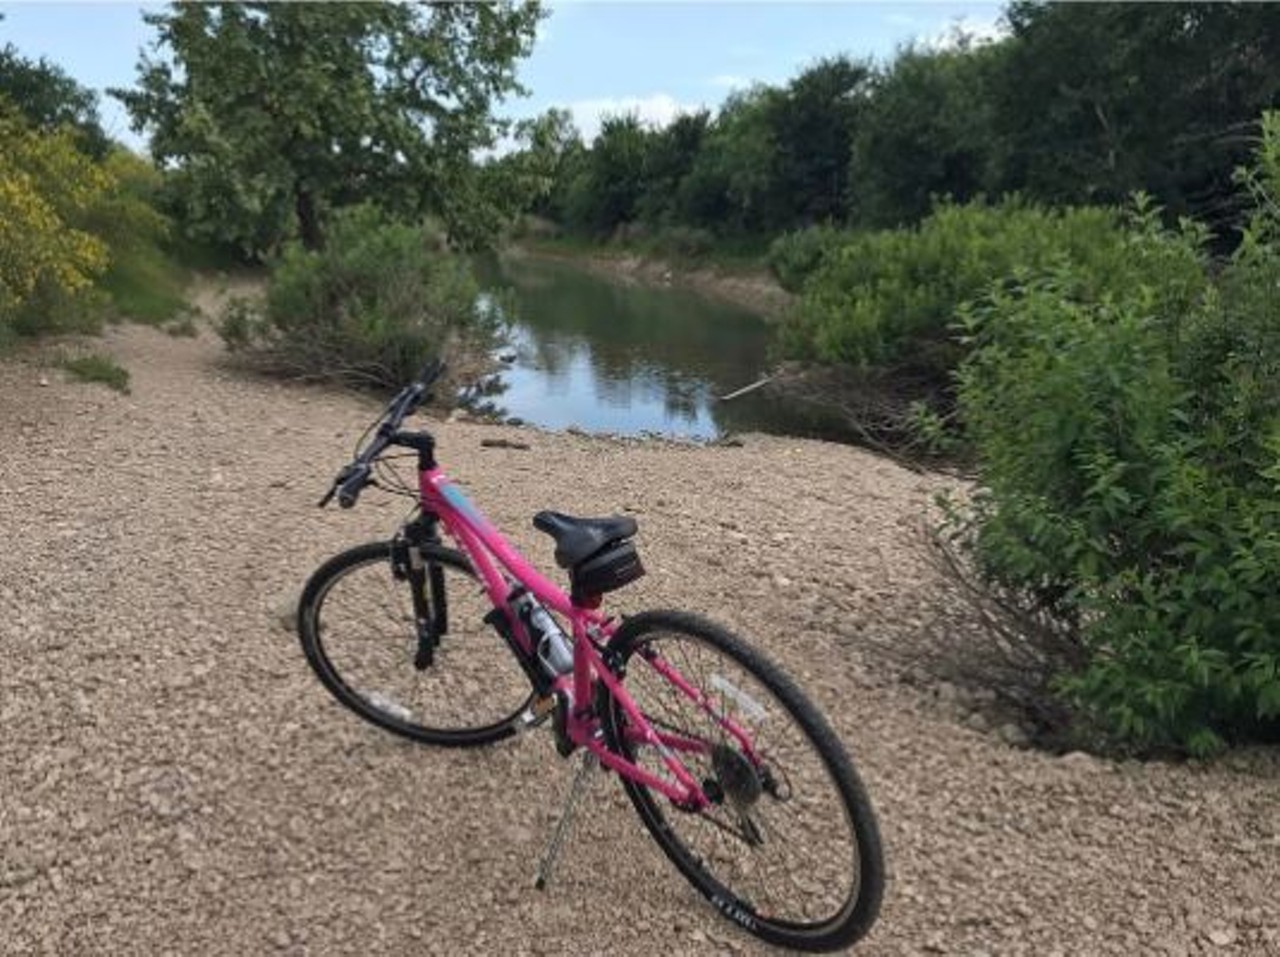 O.P. Schnabel Park 
9606 Bandera Road, (210) 207-7275
The trails at this park are perfect for the adventurous types. Enjoy a scenic bike ride and picnic at this hidden treasure.
Photo via Instagram, fearttabby